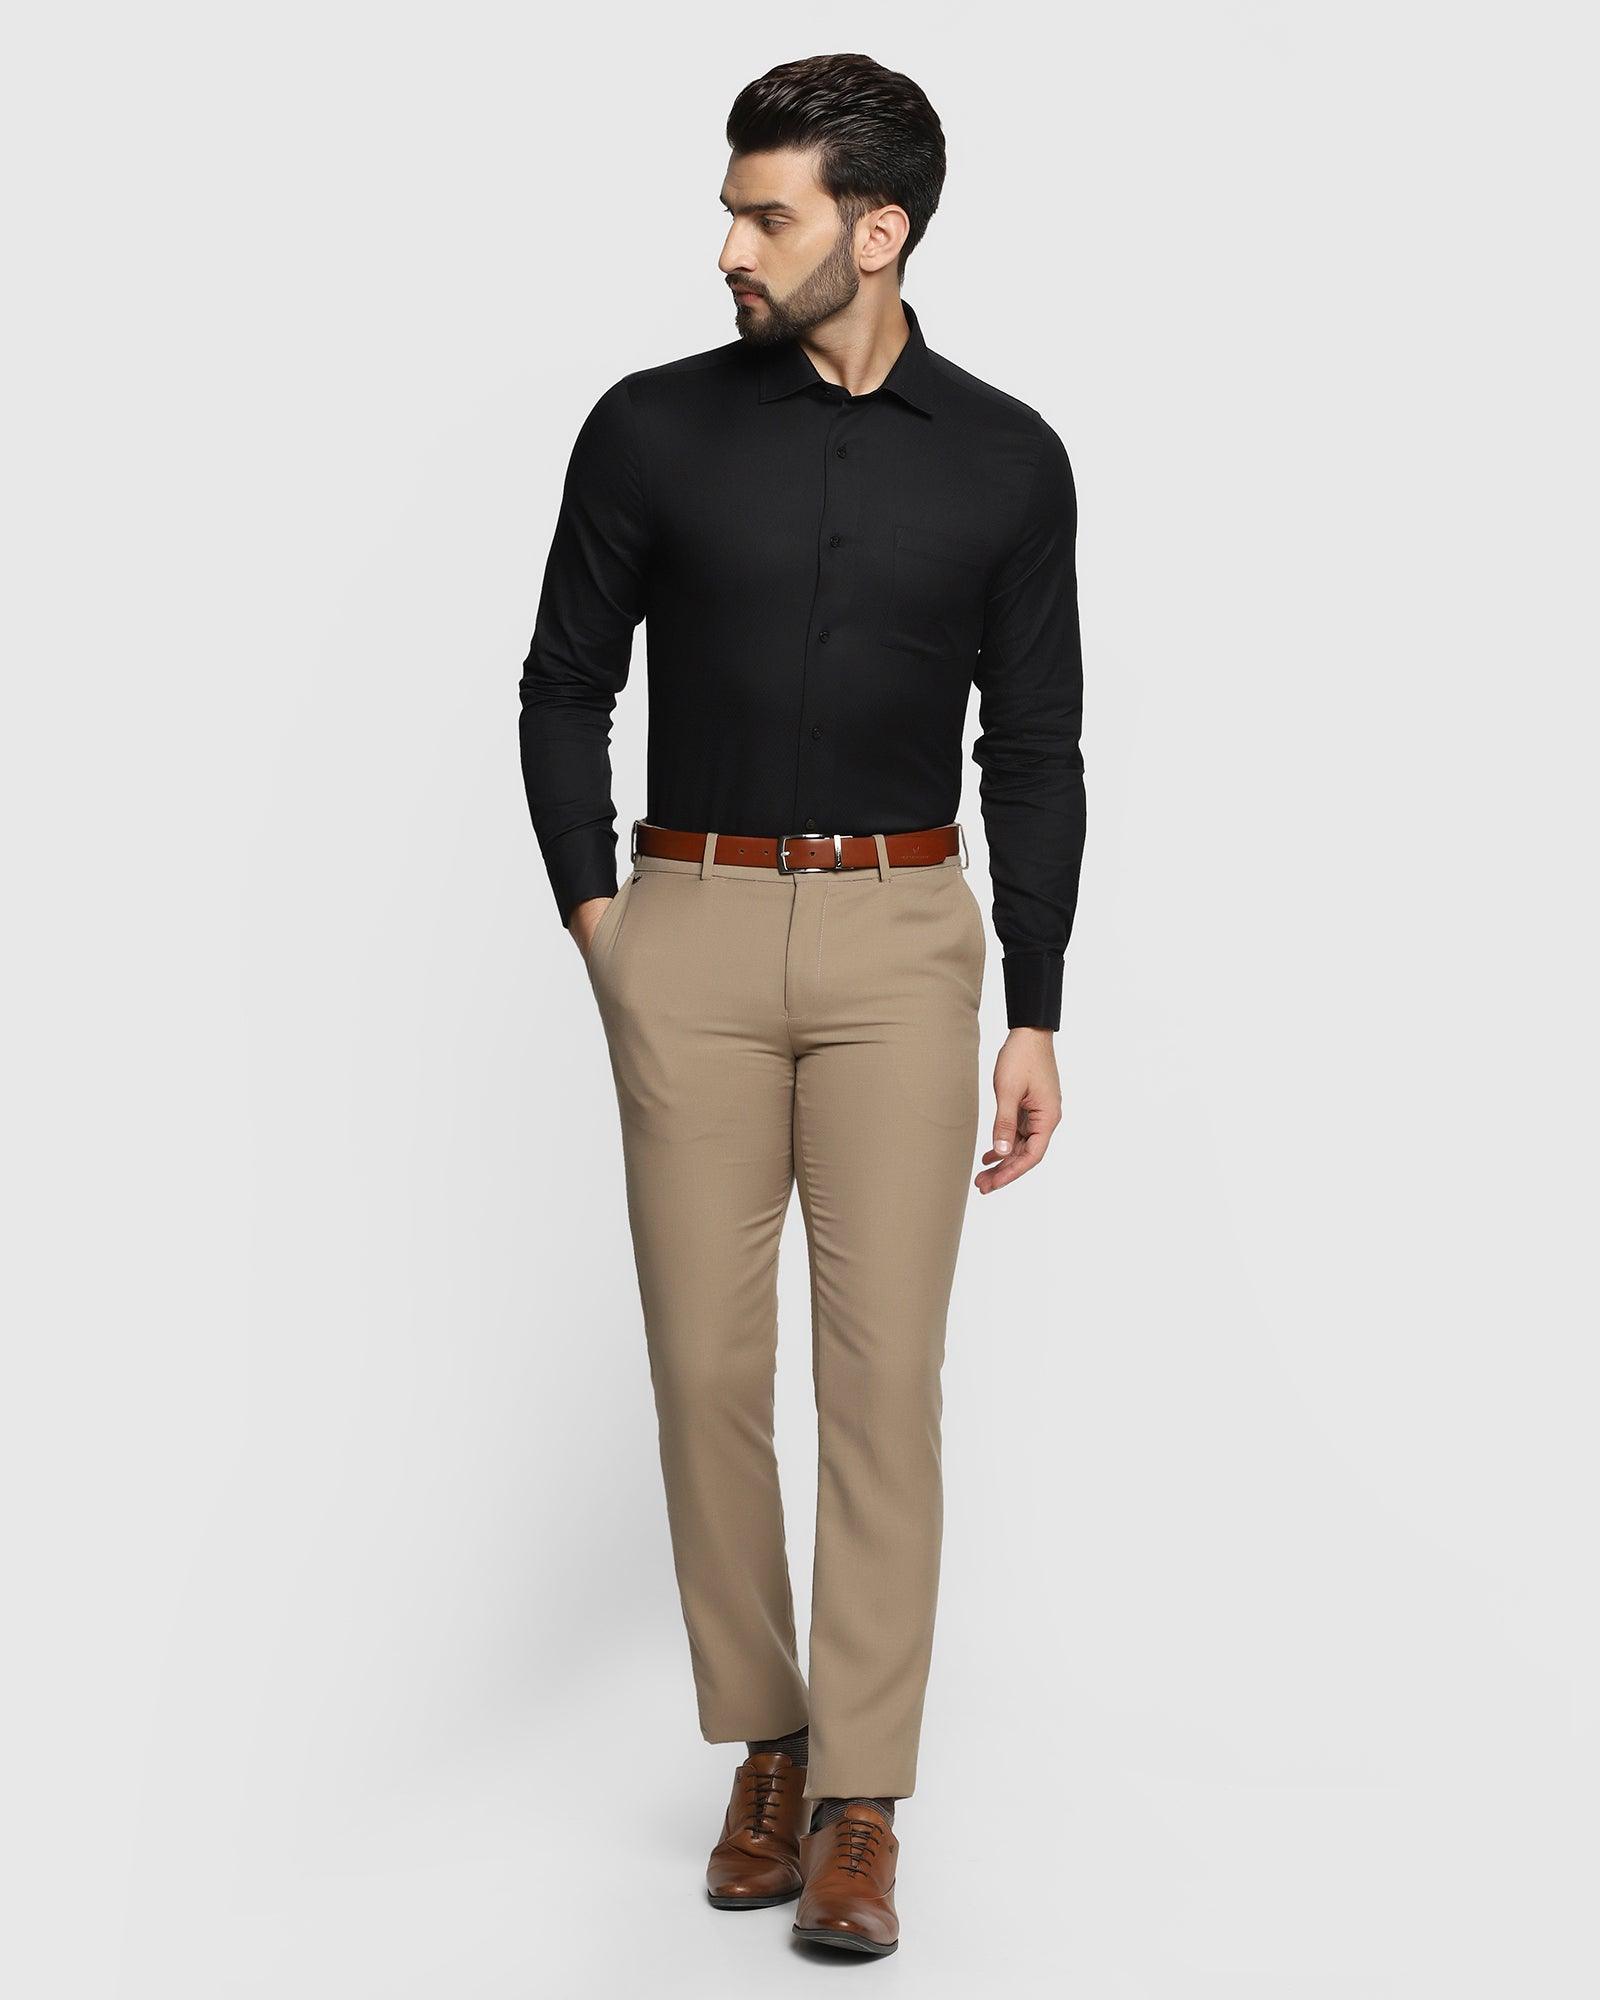 3000 Black Shirt Brown Pants Stock Photos Pictures  RoyaltyFree Images   iStock